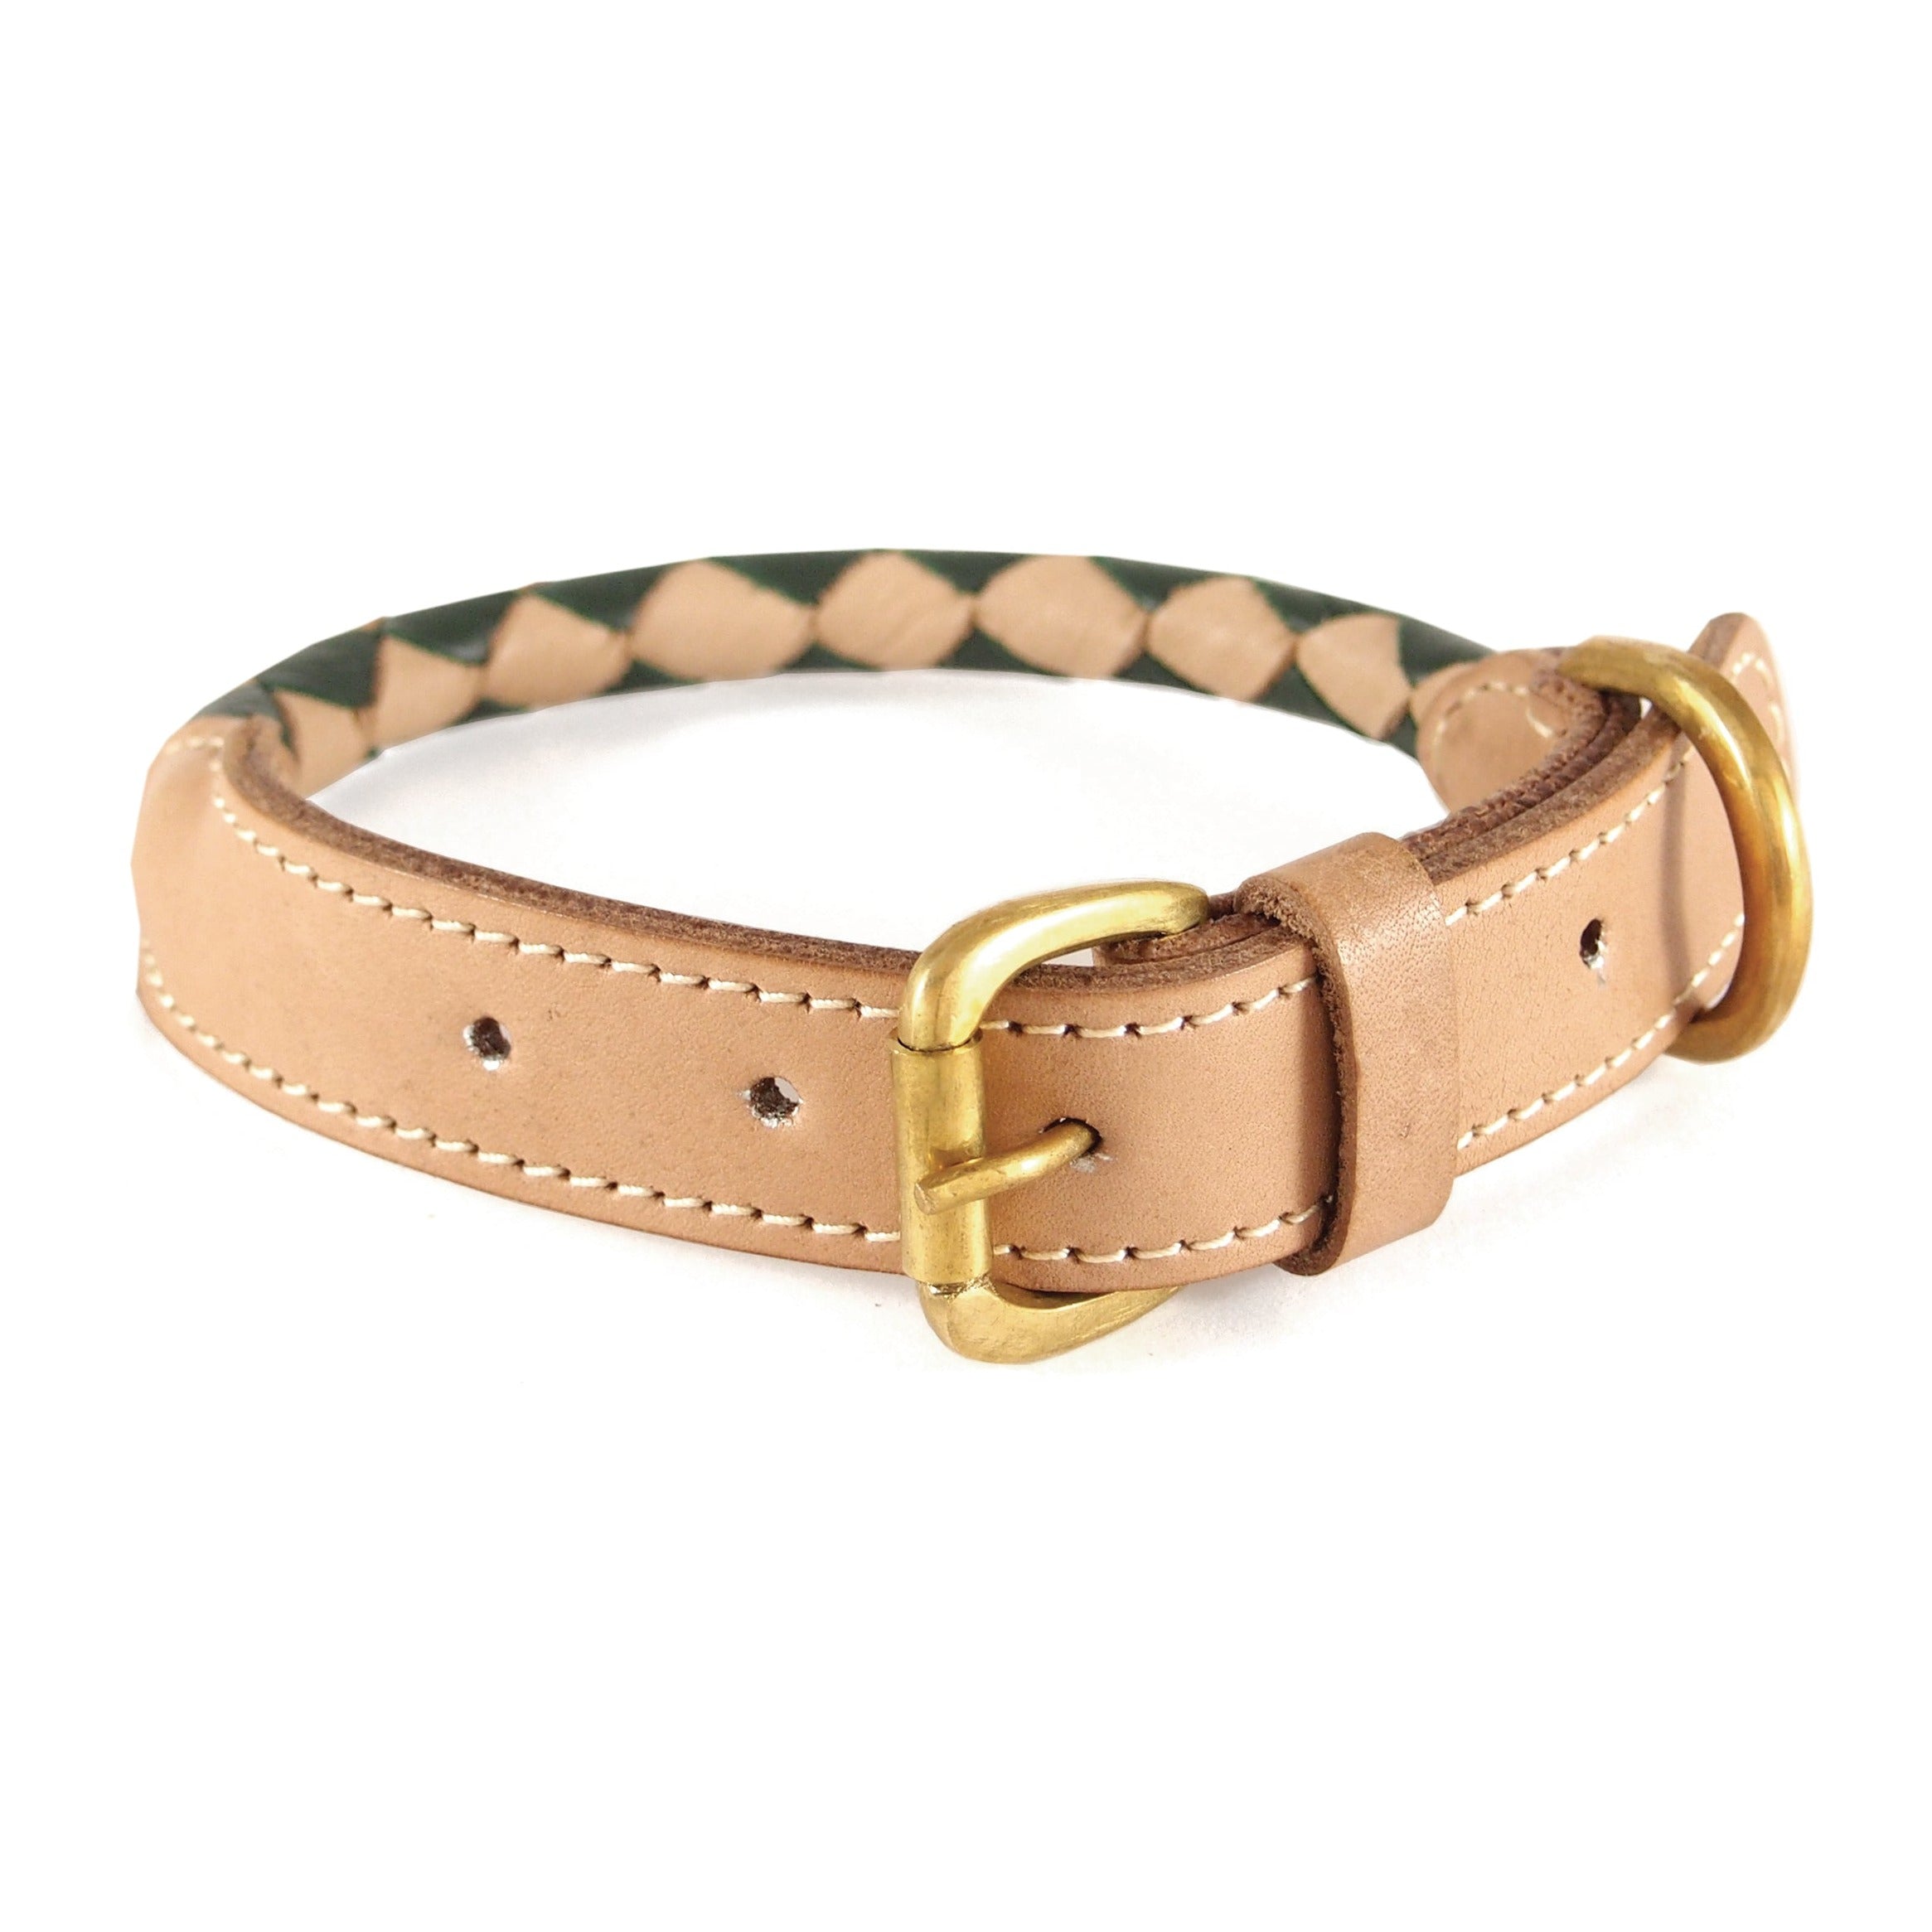 A Rocket Collar chive + natural made by Georgie Paws with a diamond-patterned inner lining, featuring gold-tone antique brass hardware and d-ring, likely designed for a small to medium-sized dog.